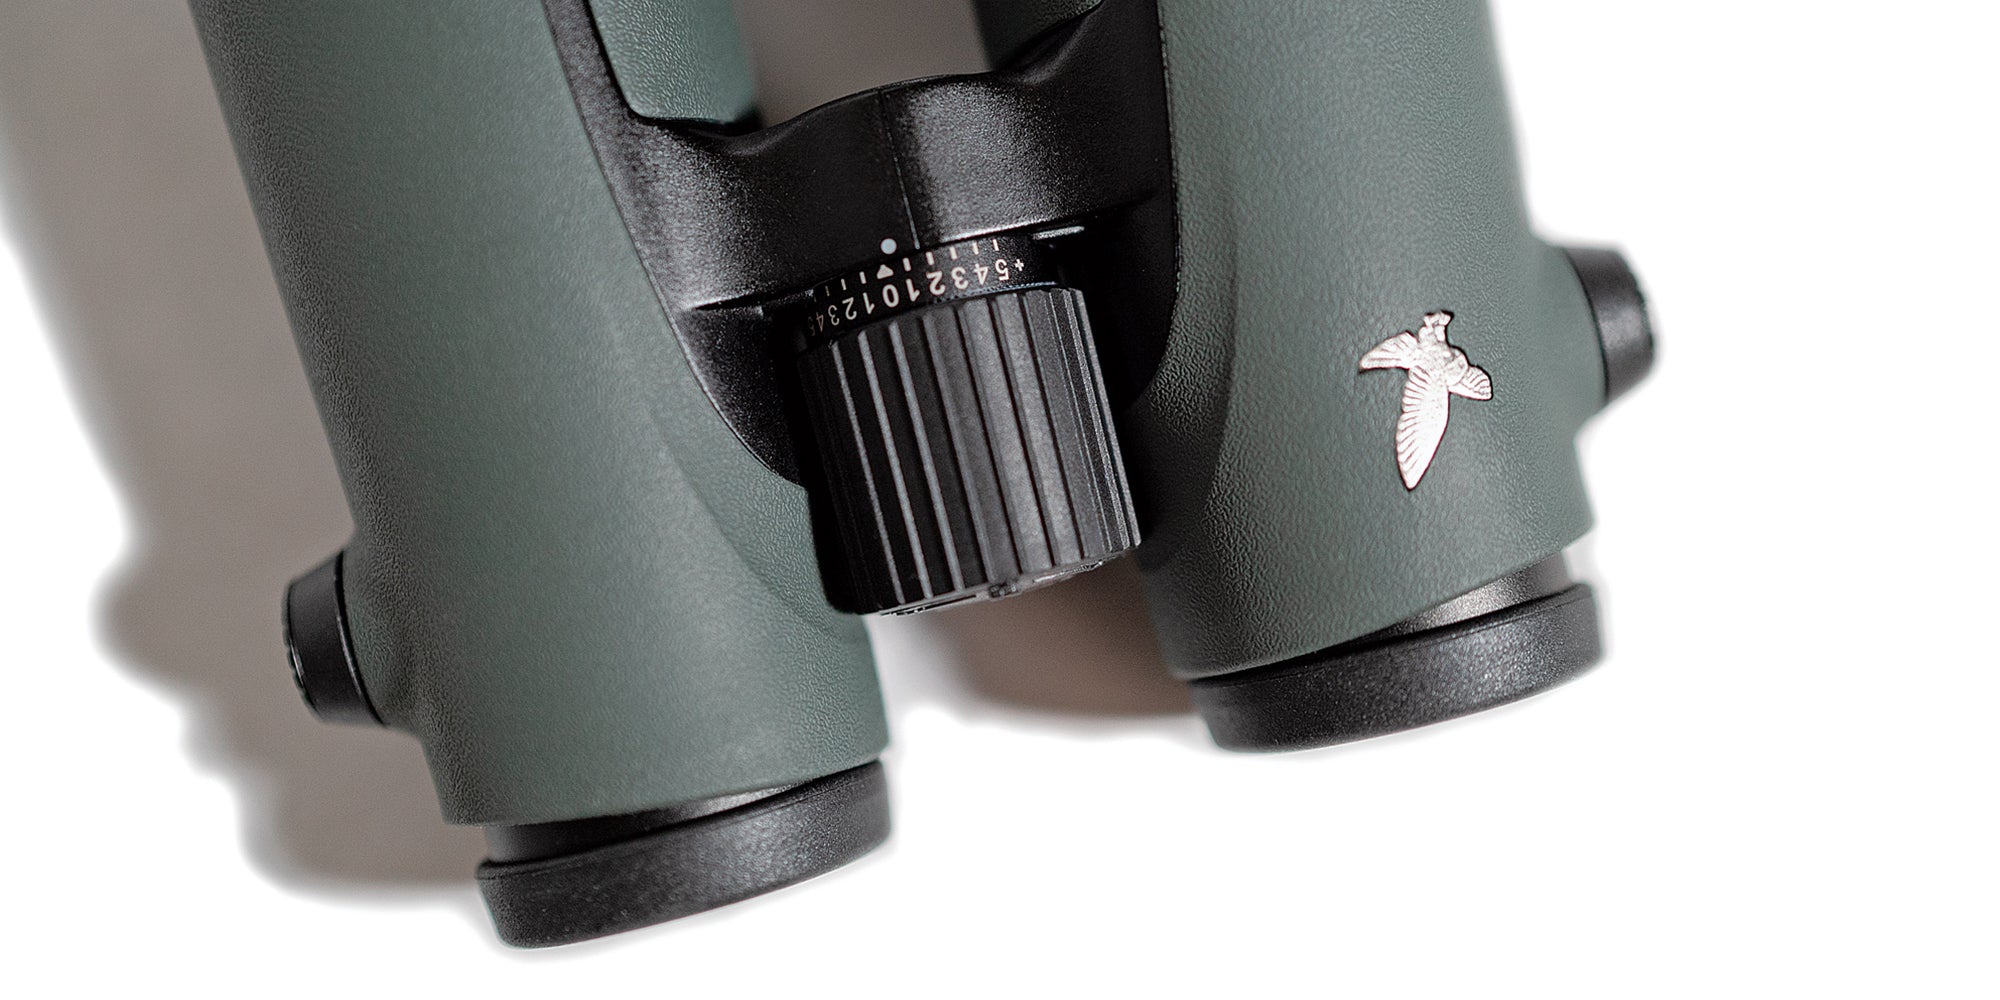 The science behind what makes binoculars so expensive.